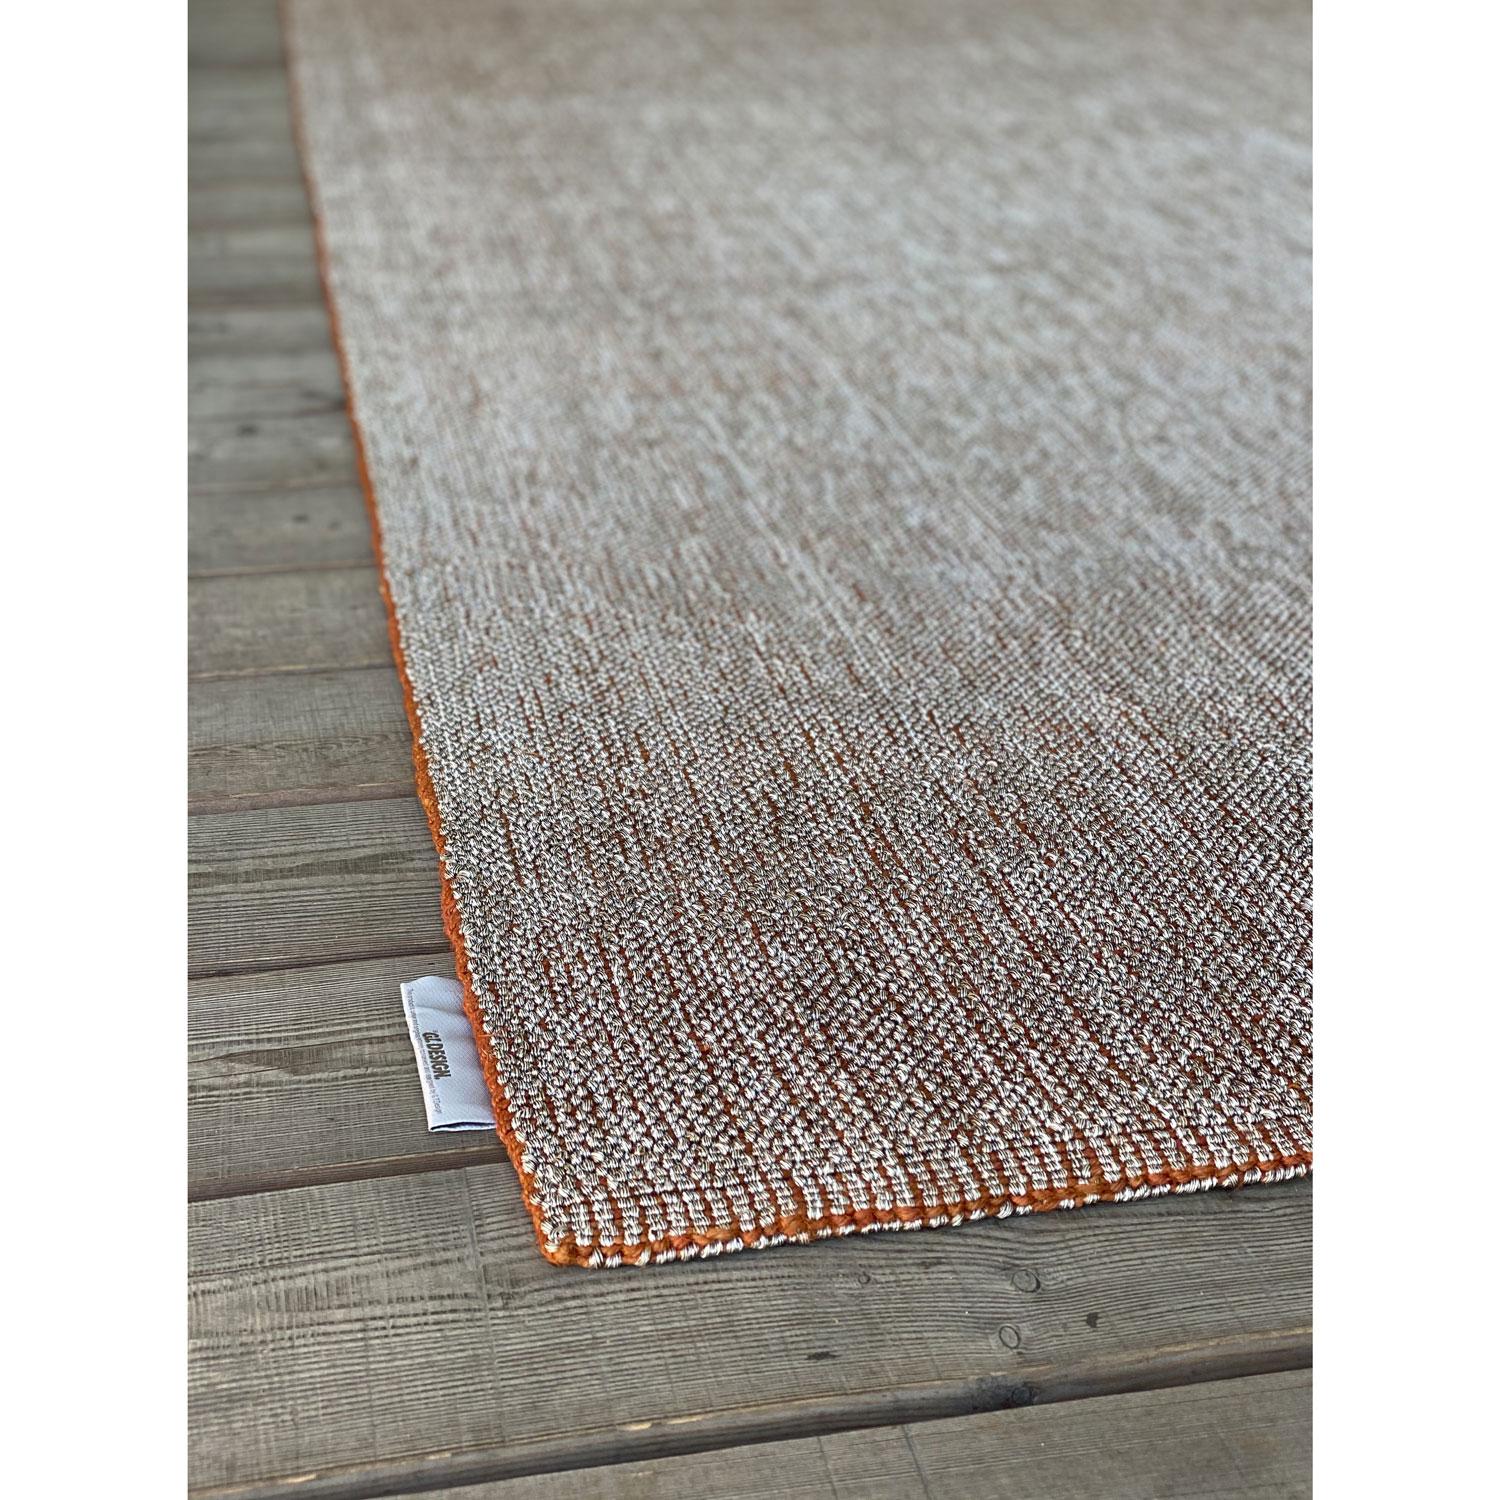 Hand-Woven 21st Cent Performing Grey Orange Design Rug by Deanna Comellini 250x350 cm For Sale